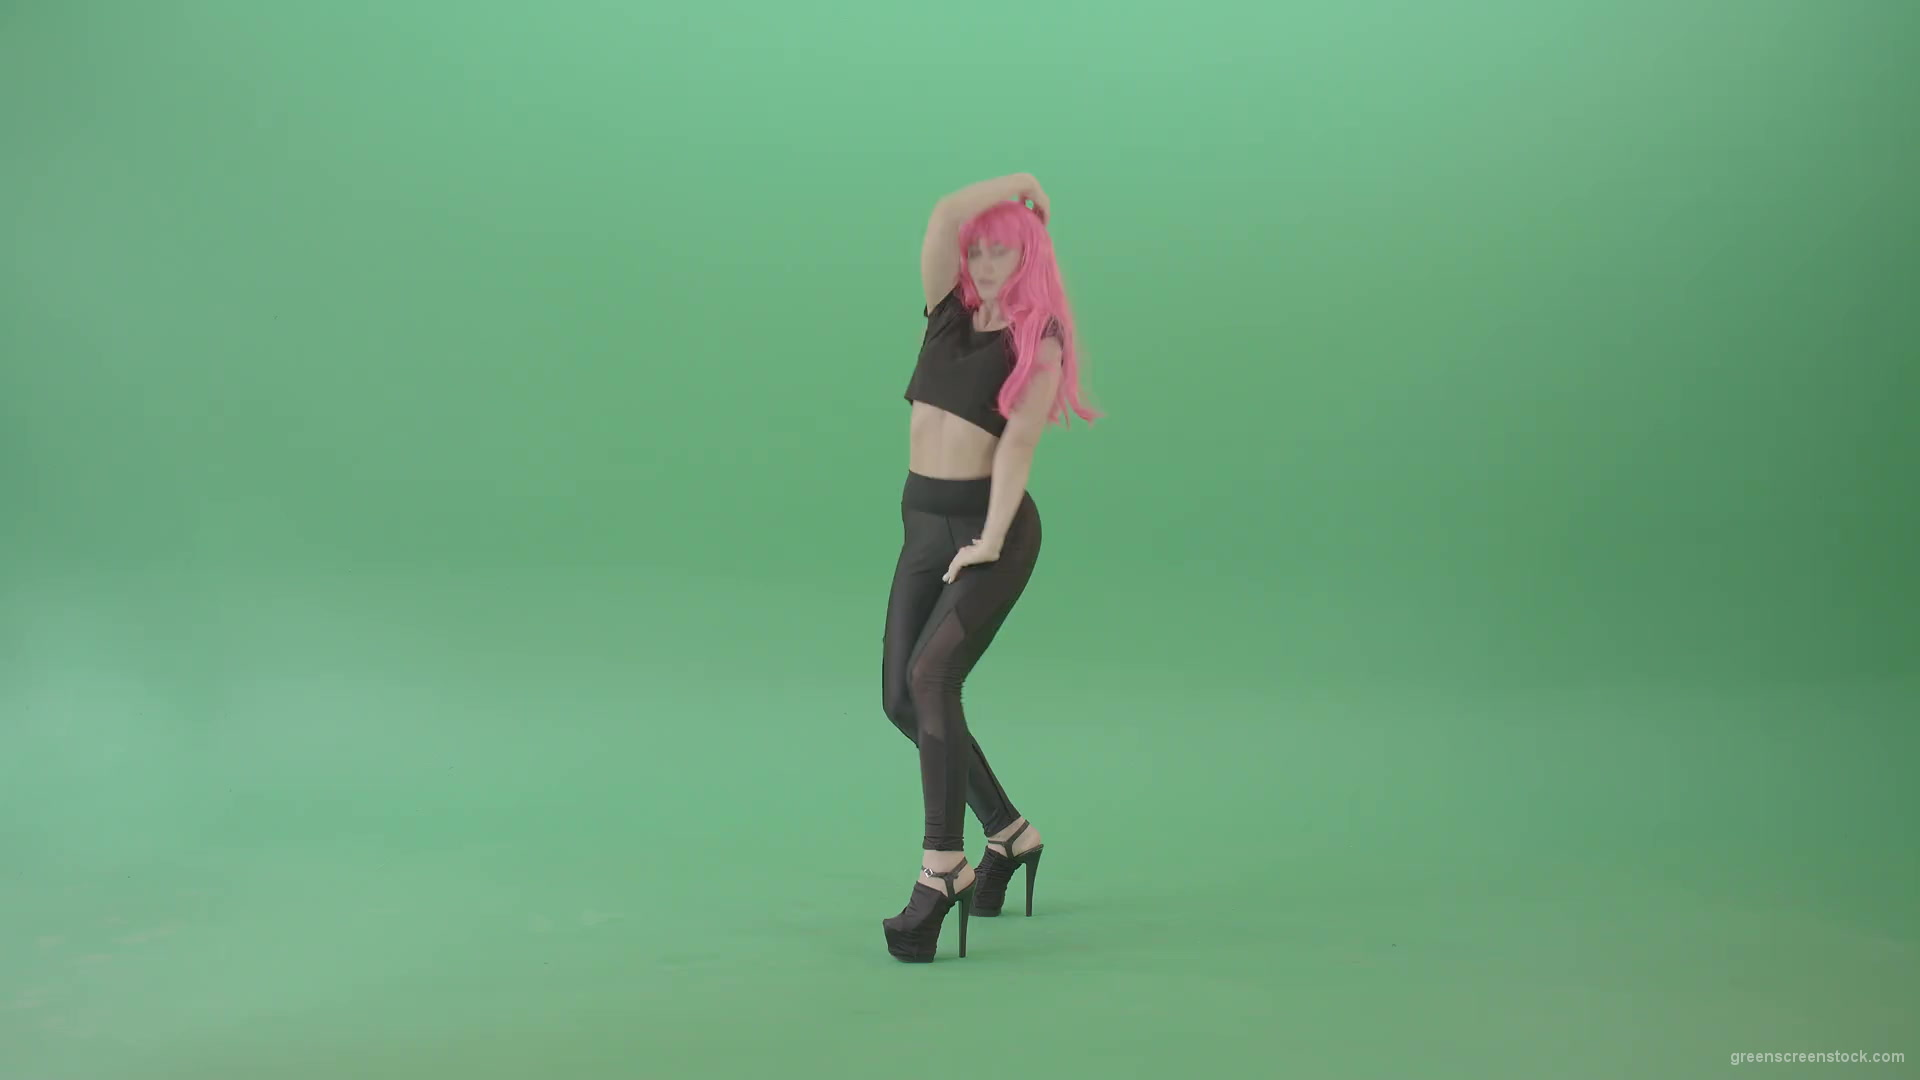 Pink-hair-girl-showing-sexy-moves-dancing-strip-on-green-screen-4K-Video-Footage-1920_001 Green Screen Stock